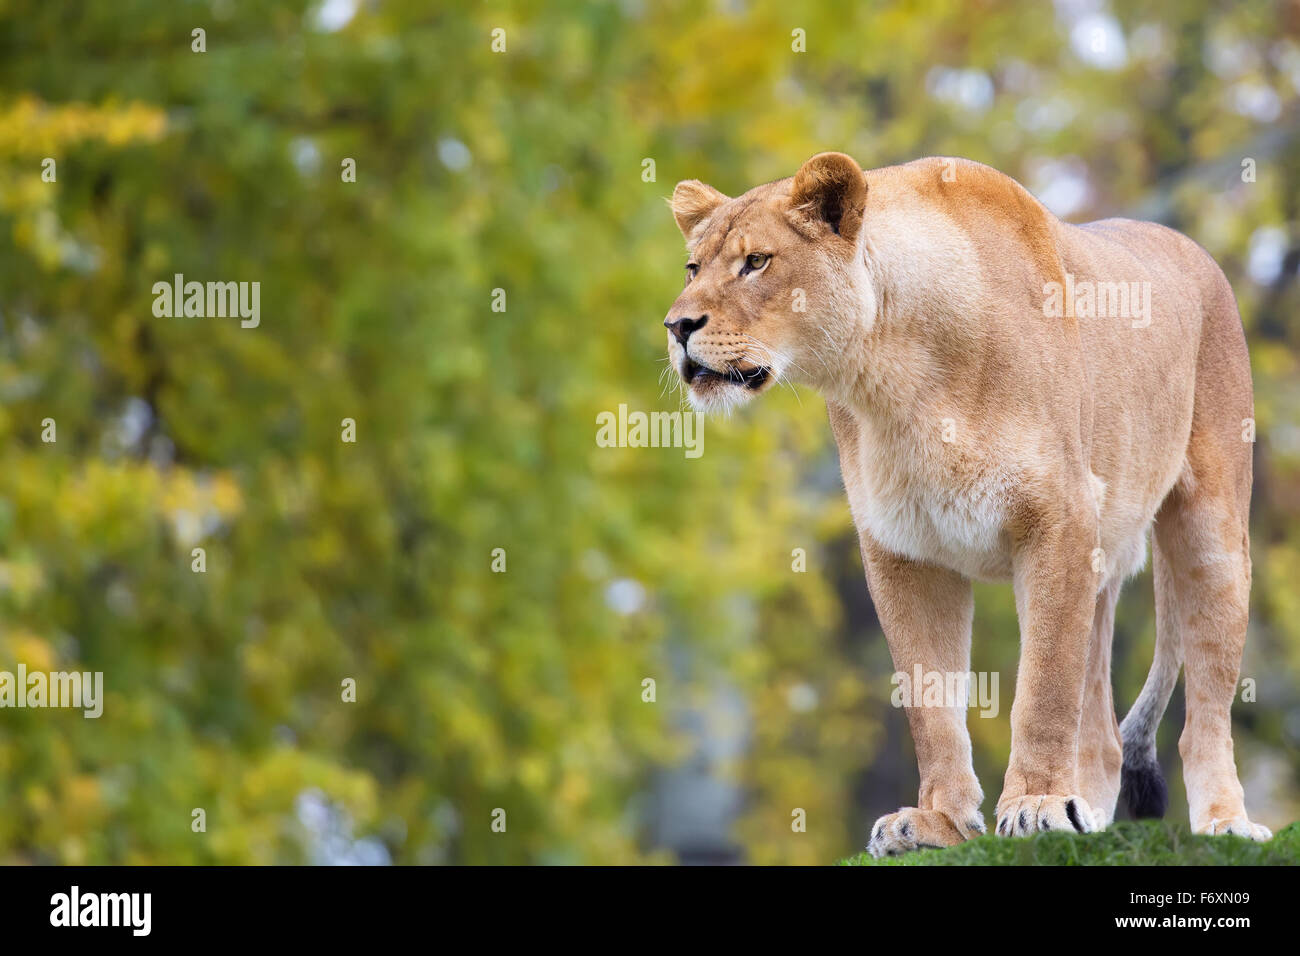 Lioness in the wild Stock Photo